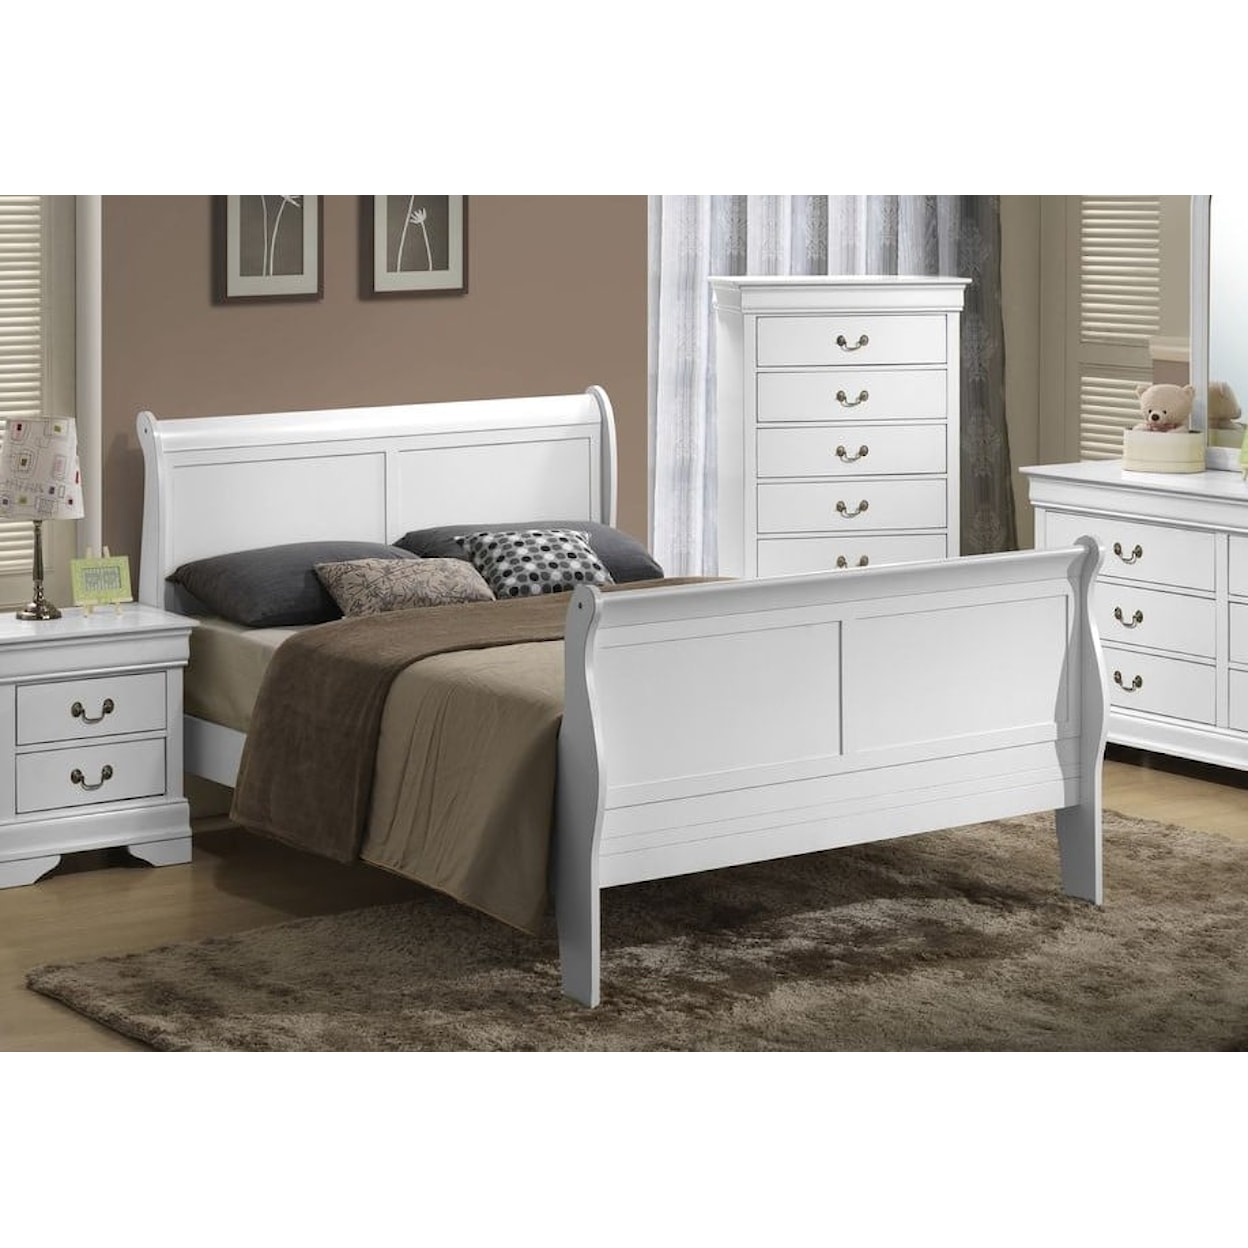 Lifestyle C4936A Twin Sleigh Bed